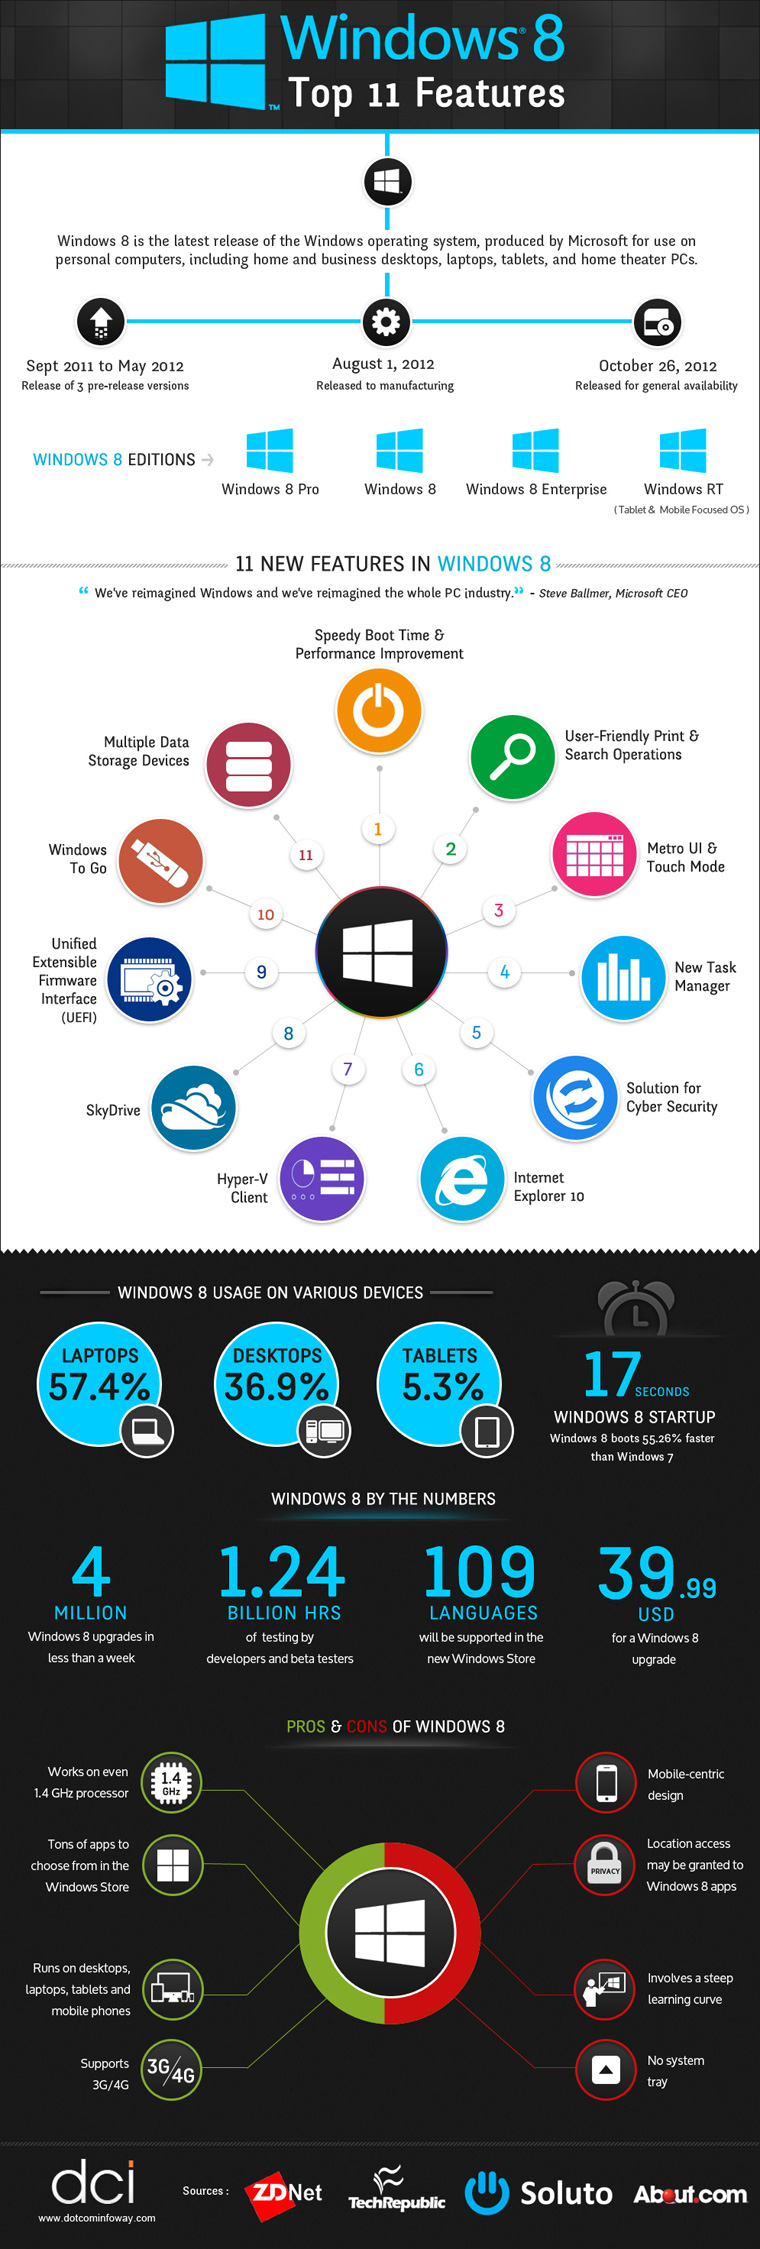 Windows 8 features infographic